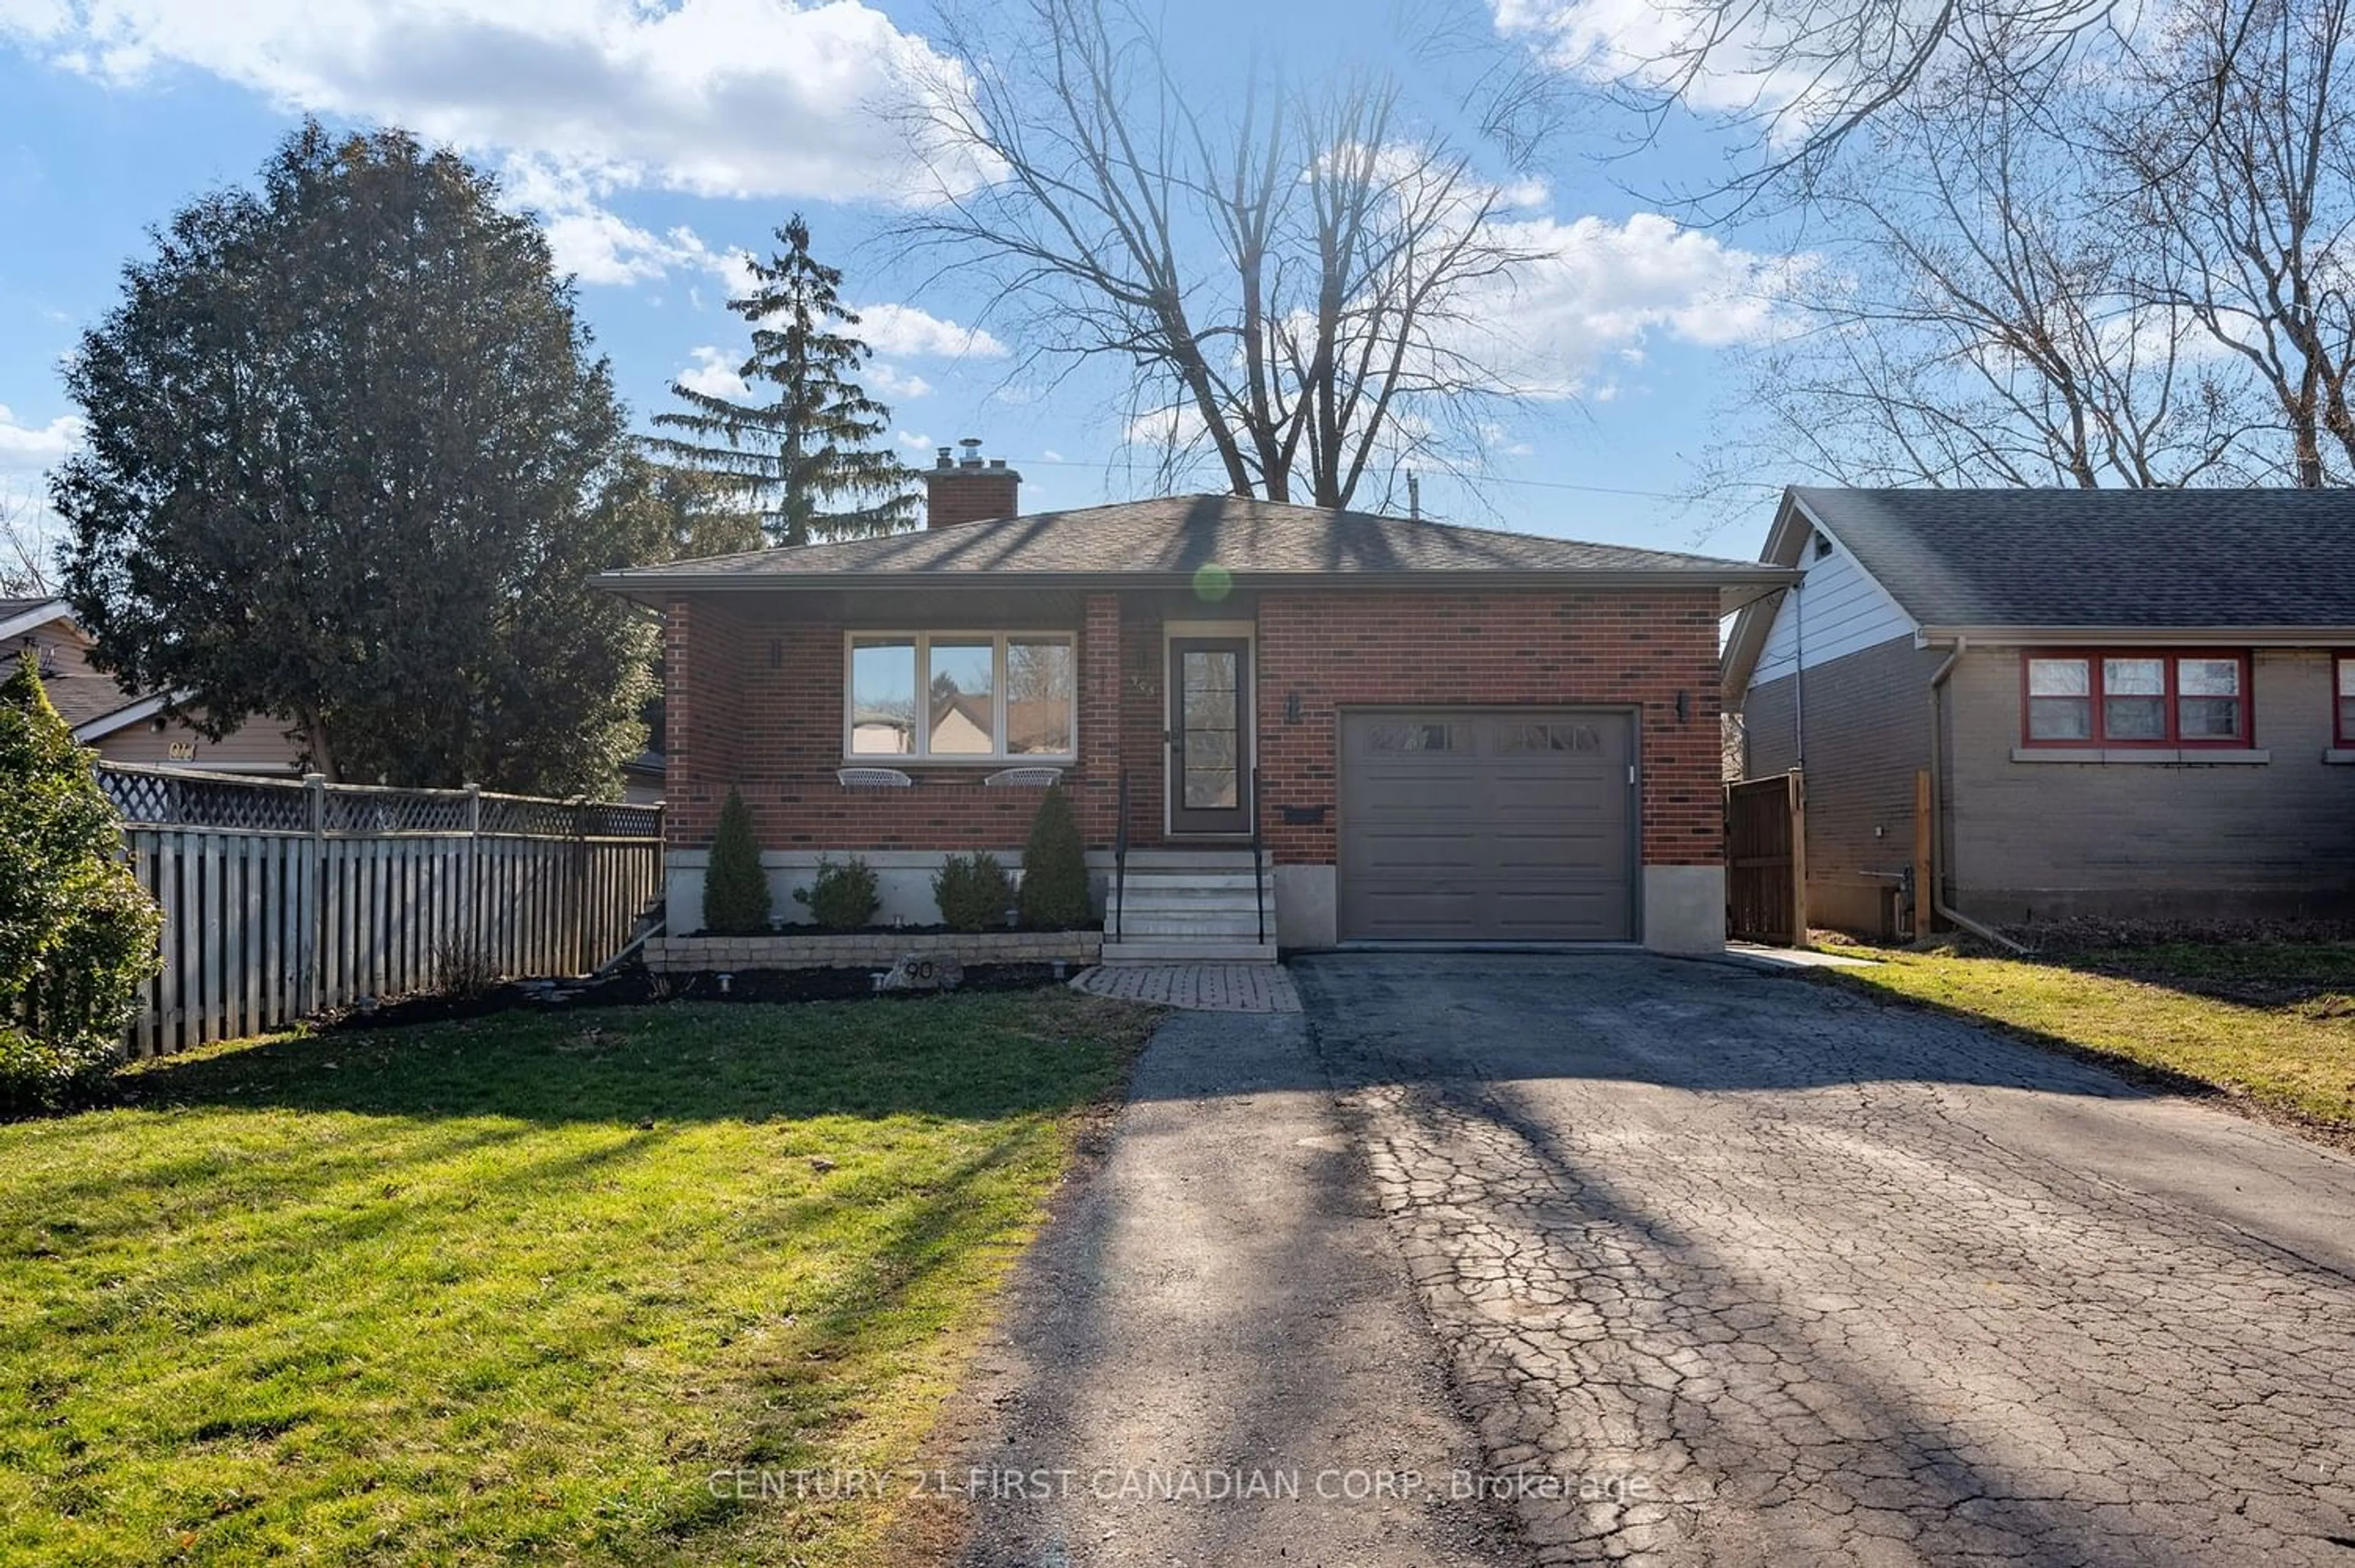 Home with brick exterior material for 905 Wellingsboro Rd, Middlesex Centre Ontario N6E 1N4